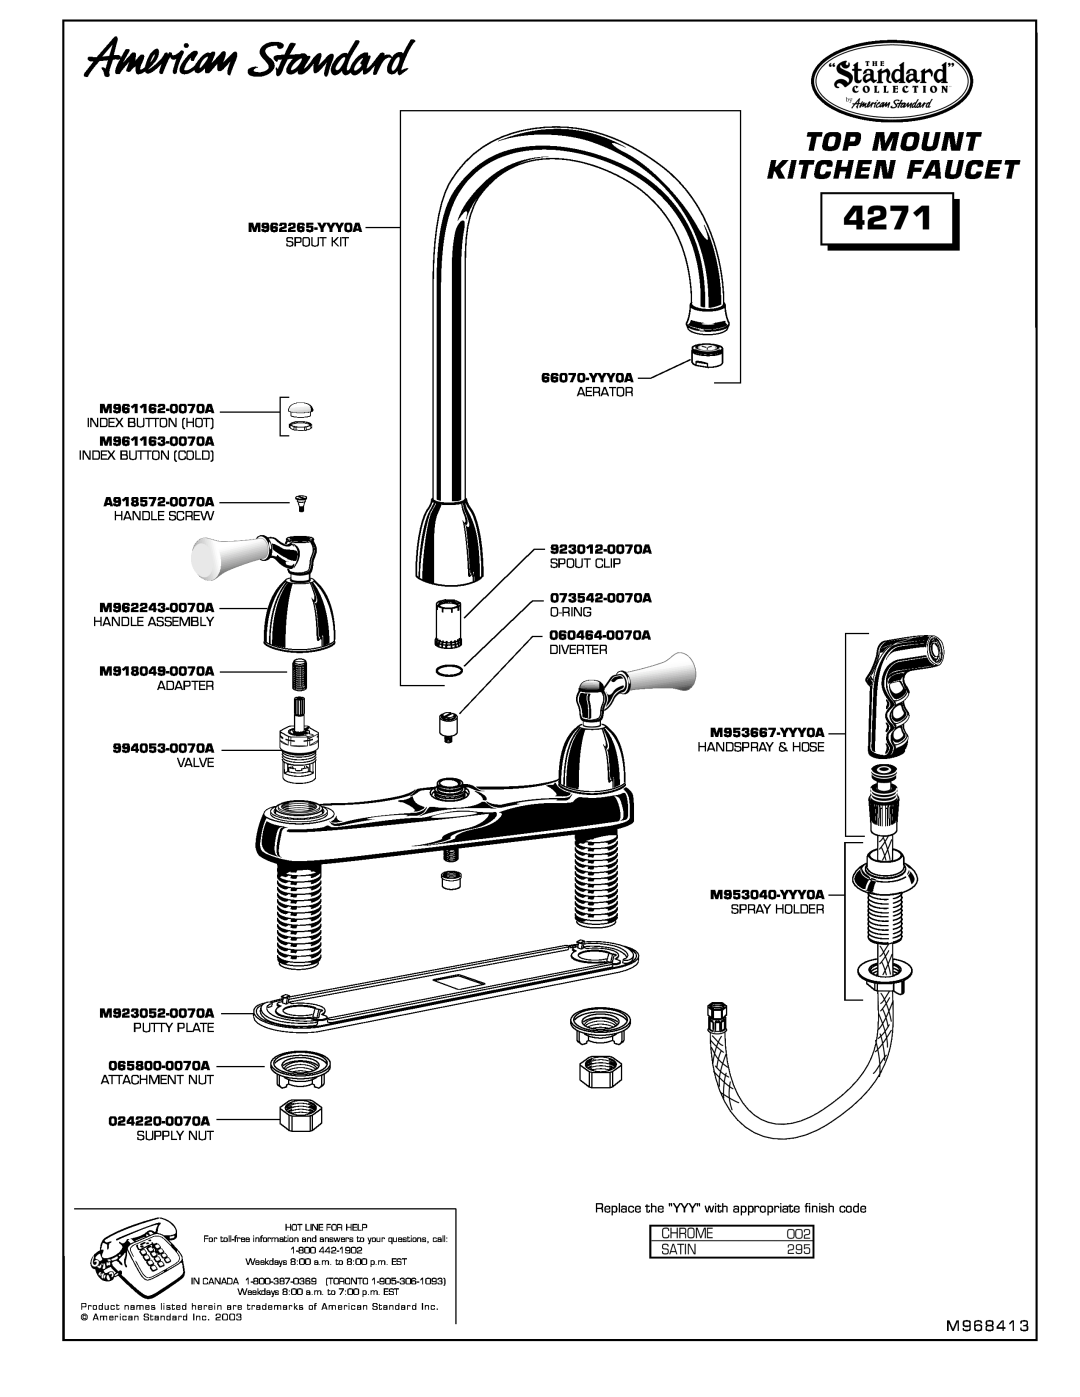 American Standard 4271 installation instructions Top Mount Kitchen Faucet, CHROME SATIN295 M968413 